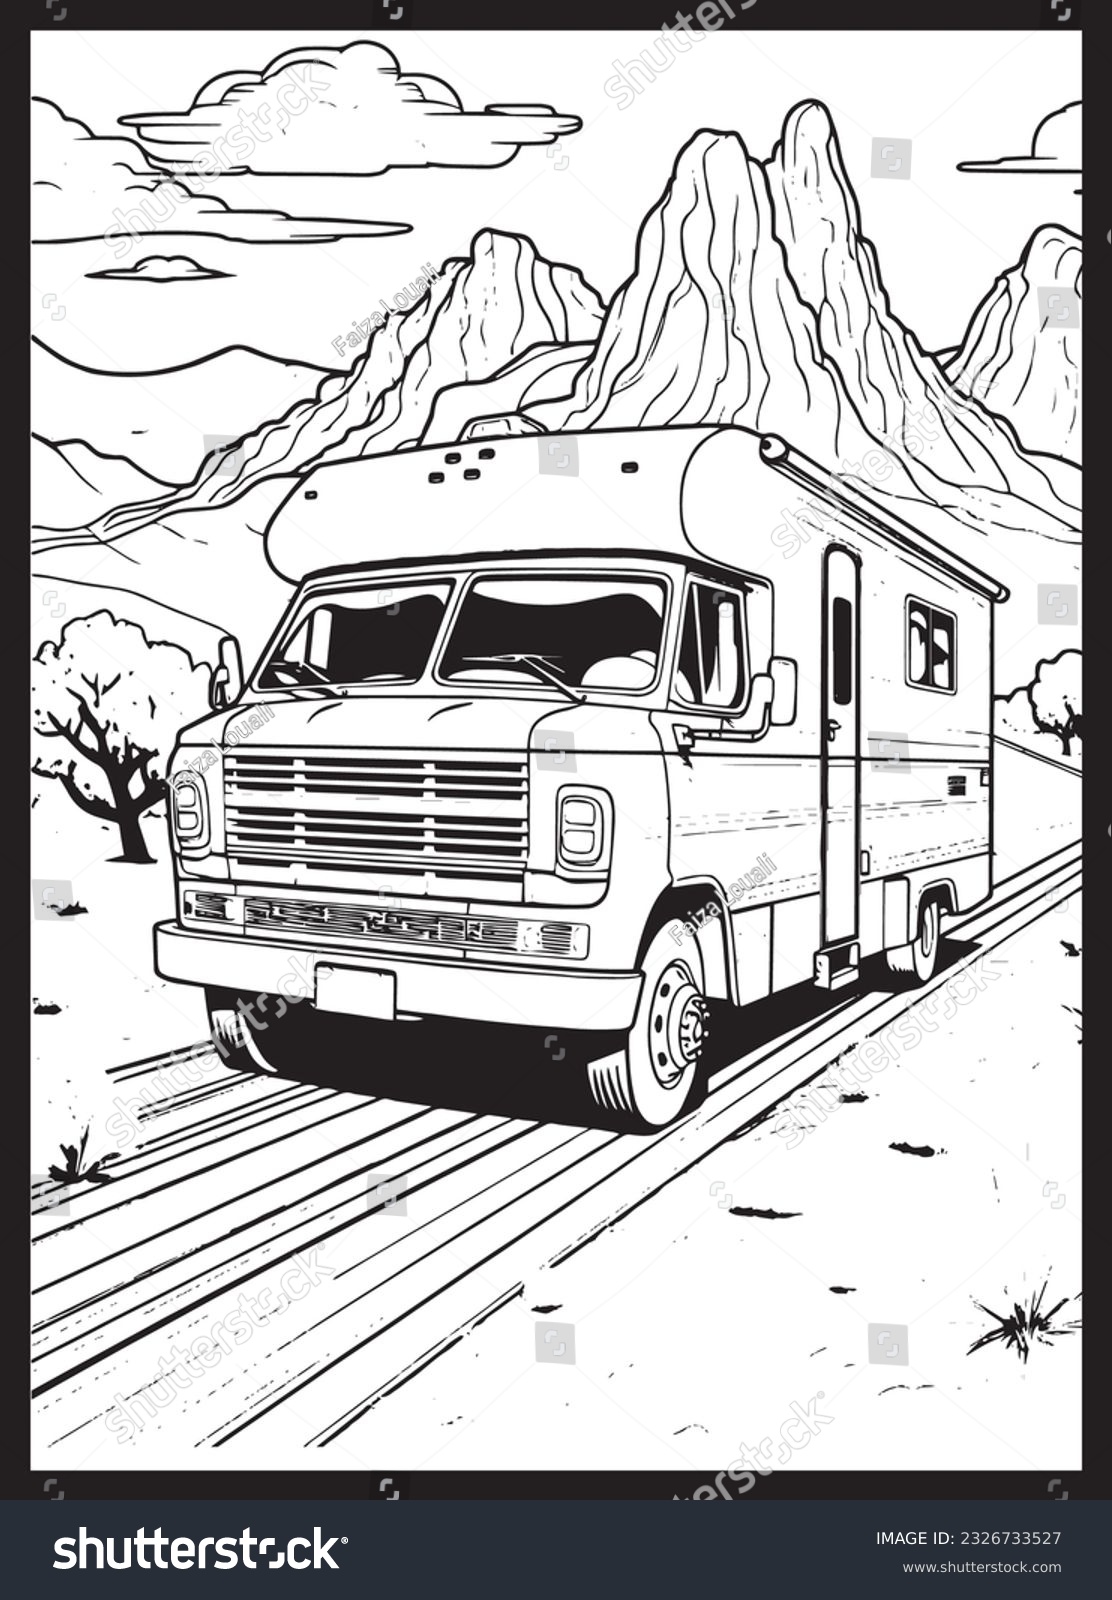 Rv road trip coloring pages adults stock vector royalty free